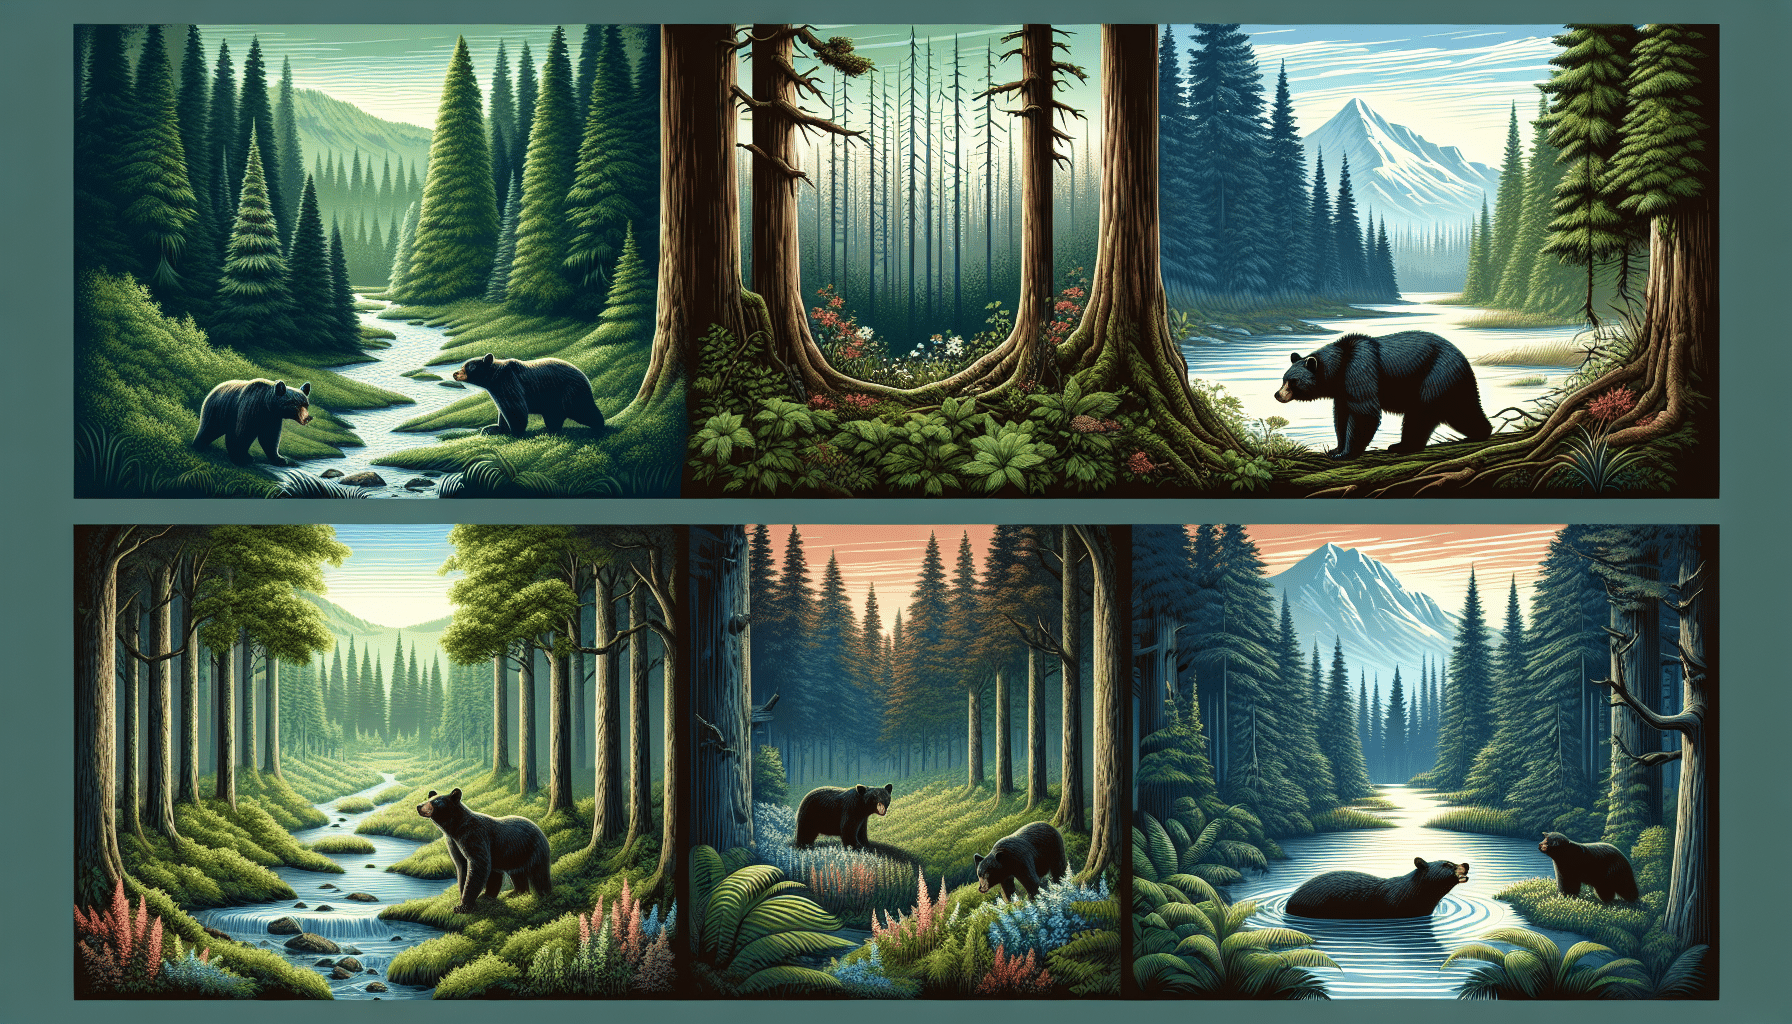 An illustration of a stunning forest landscape across different continents where black bears are typically found. The first scene depicts the lush green woods of North America with tall, ancient trees and a winding river, while the second presents the diverse flora of Asian temperate forests. Each forest's ambiance is captured appropriately considering the weather conditions and time of the day. Within each landscape, a black bear is subtly present, going about its typical activities - foraging, fishing or simply lounging under a tree.